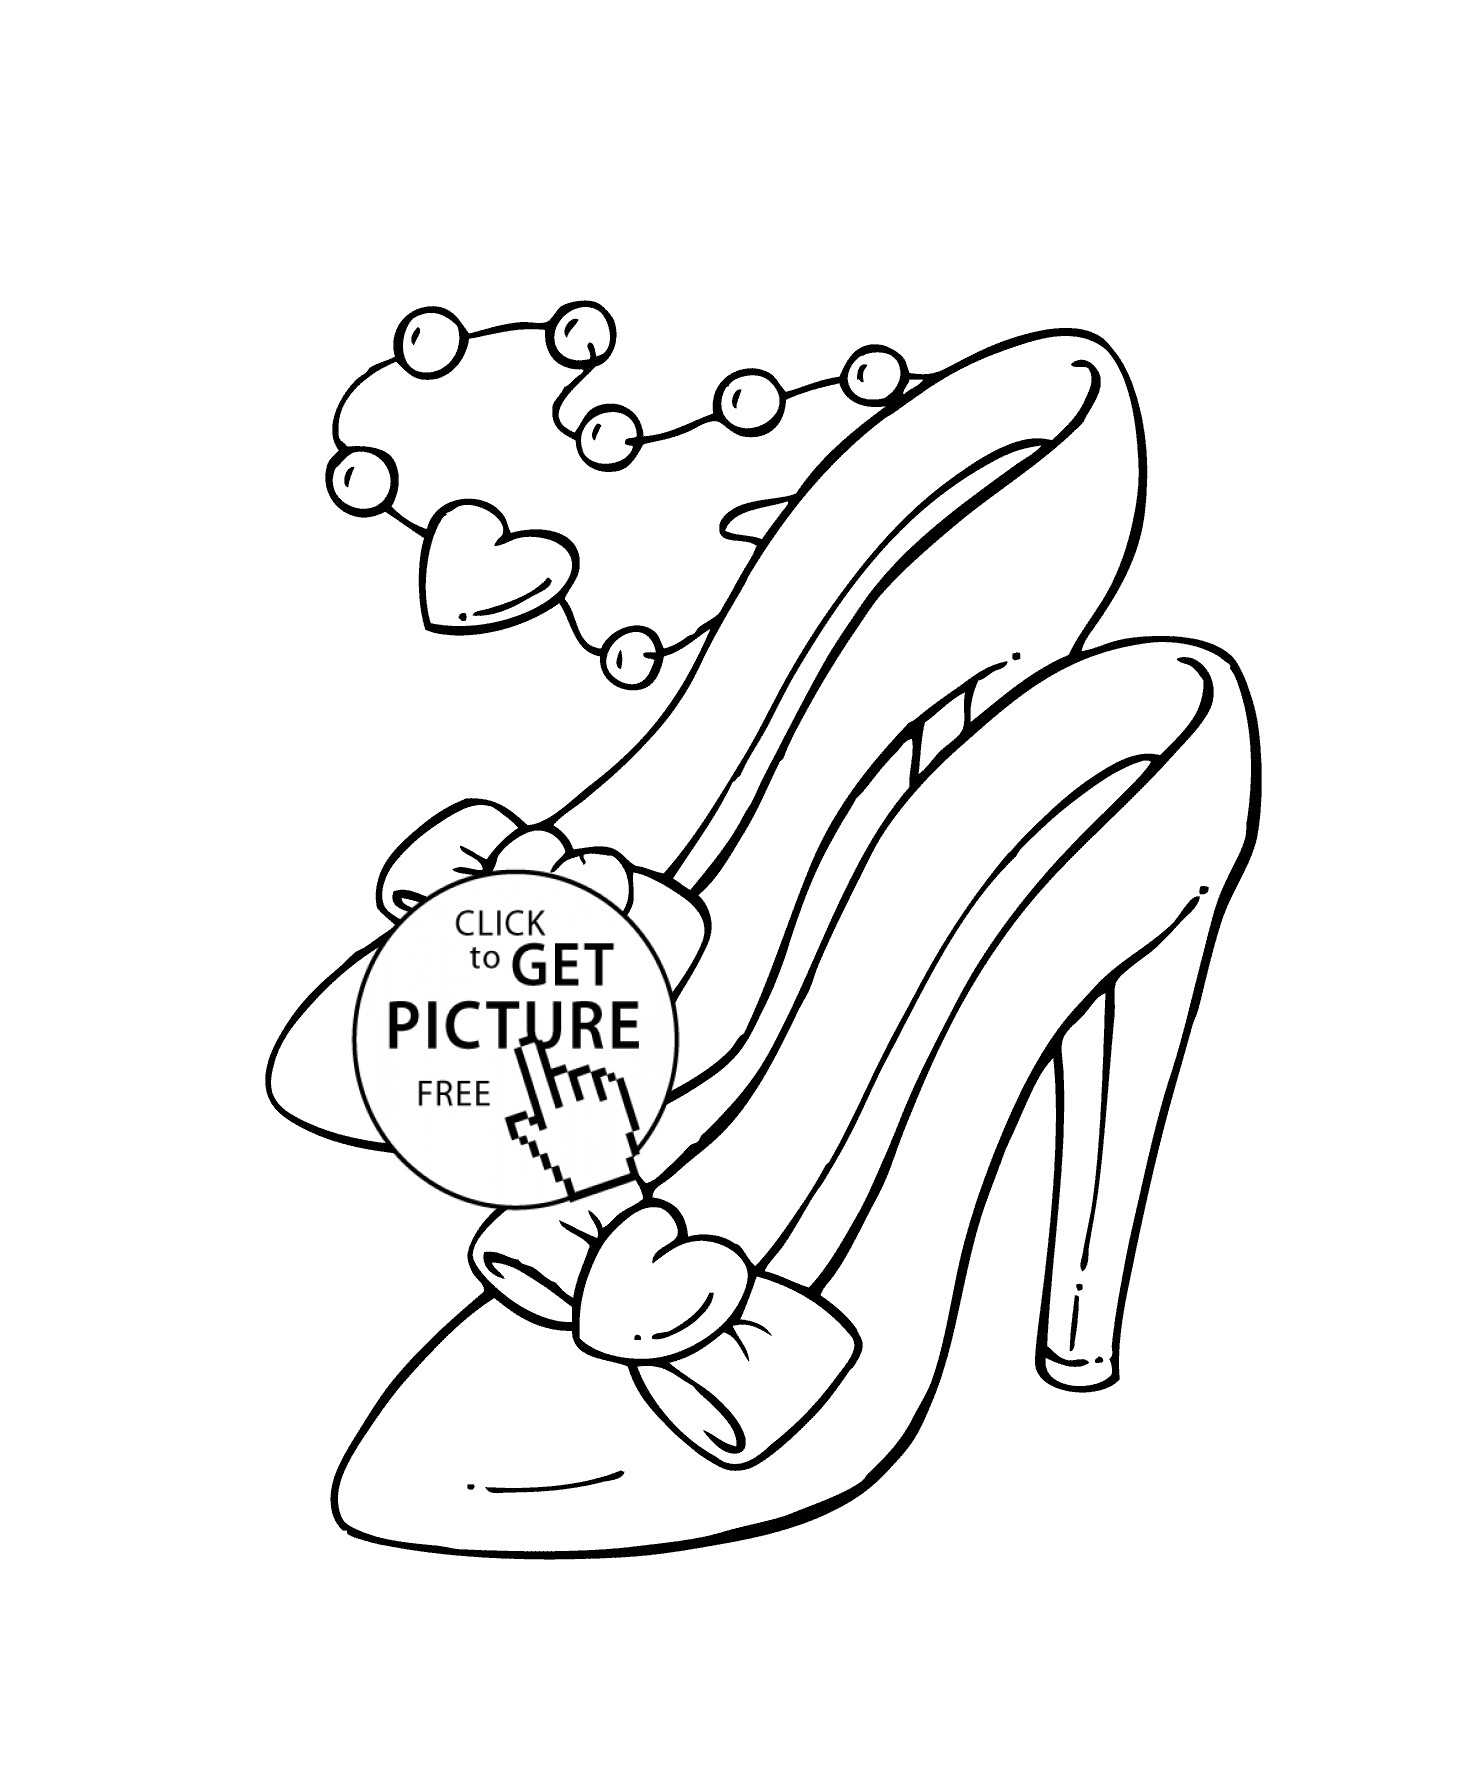 Girls Shoes Coloring Pages
 Beautiful shoes coloring page for girls printable free